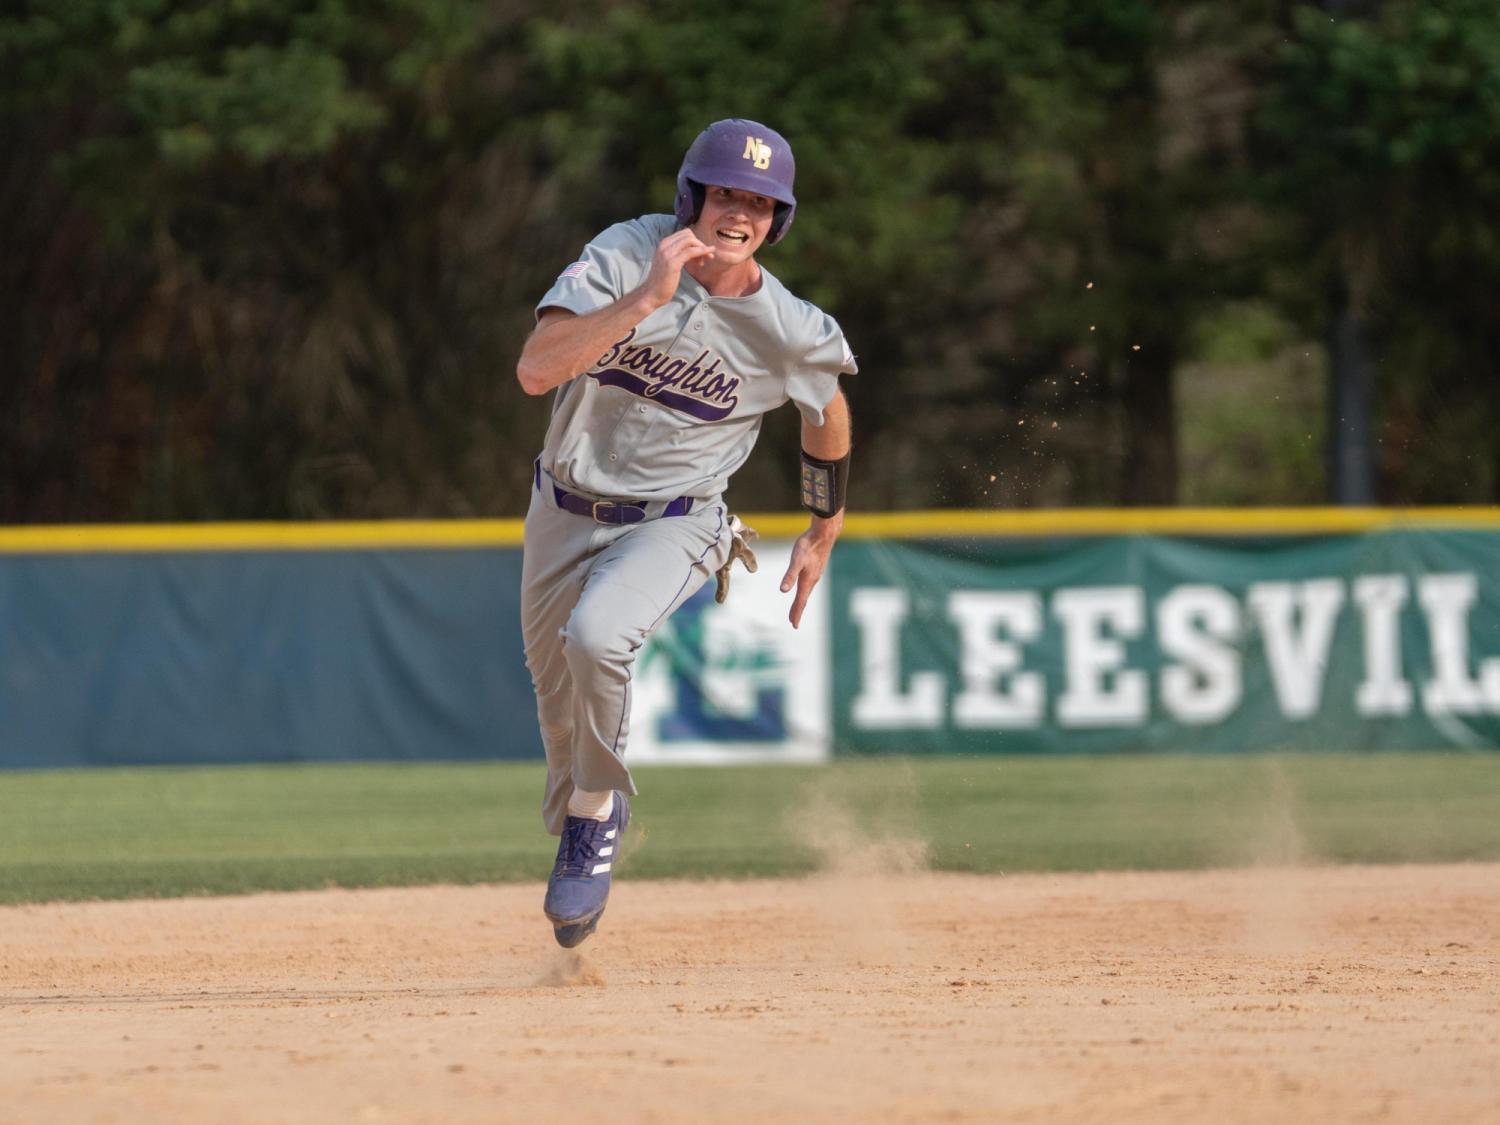 Broughton rallies to beat No. 11 Leesville Road with 4 runs in 5th inning